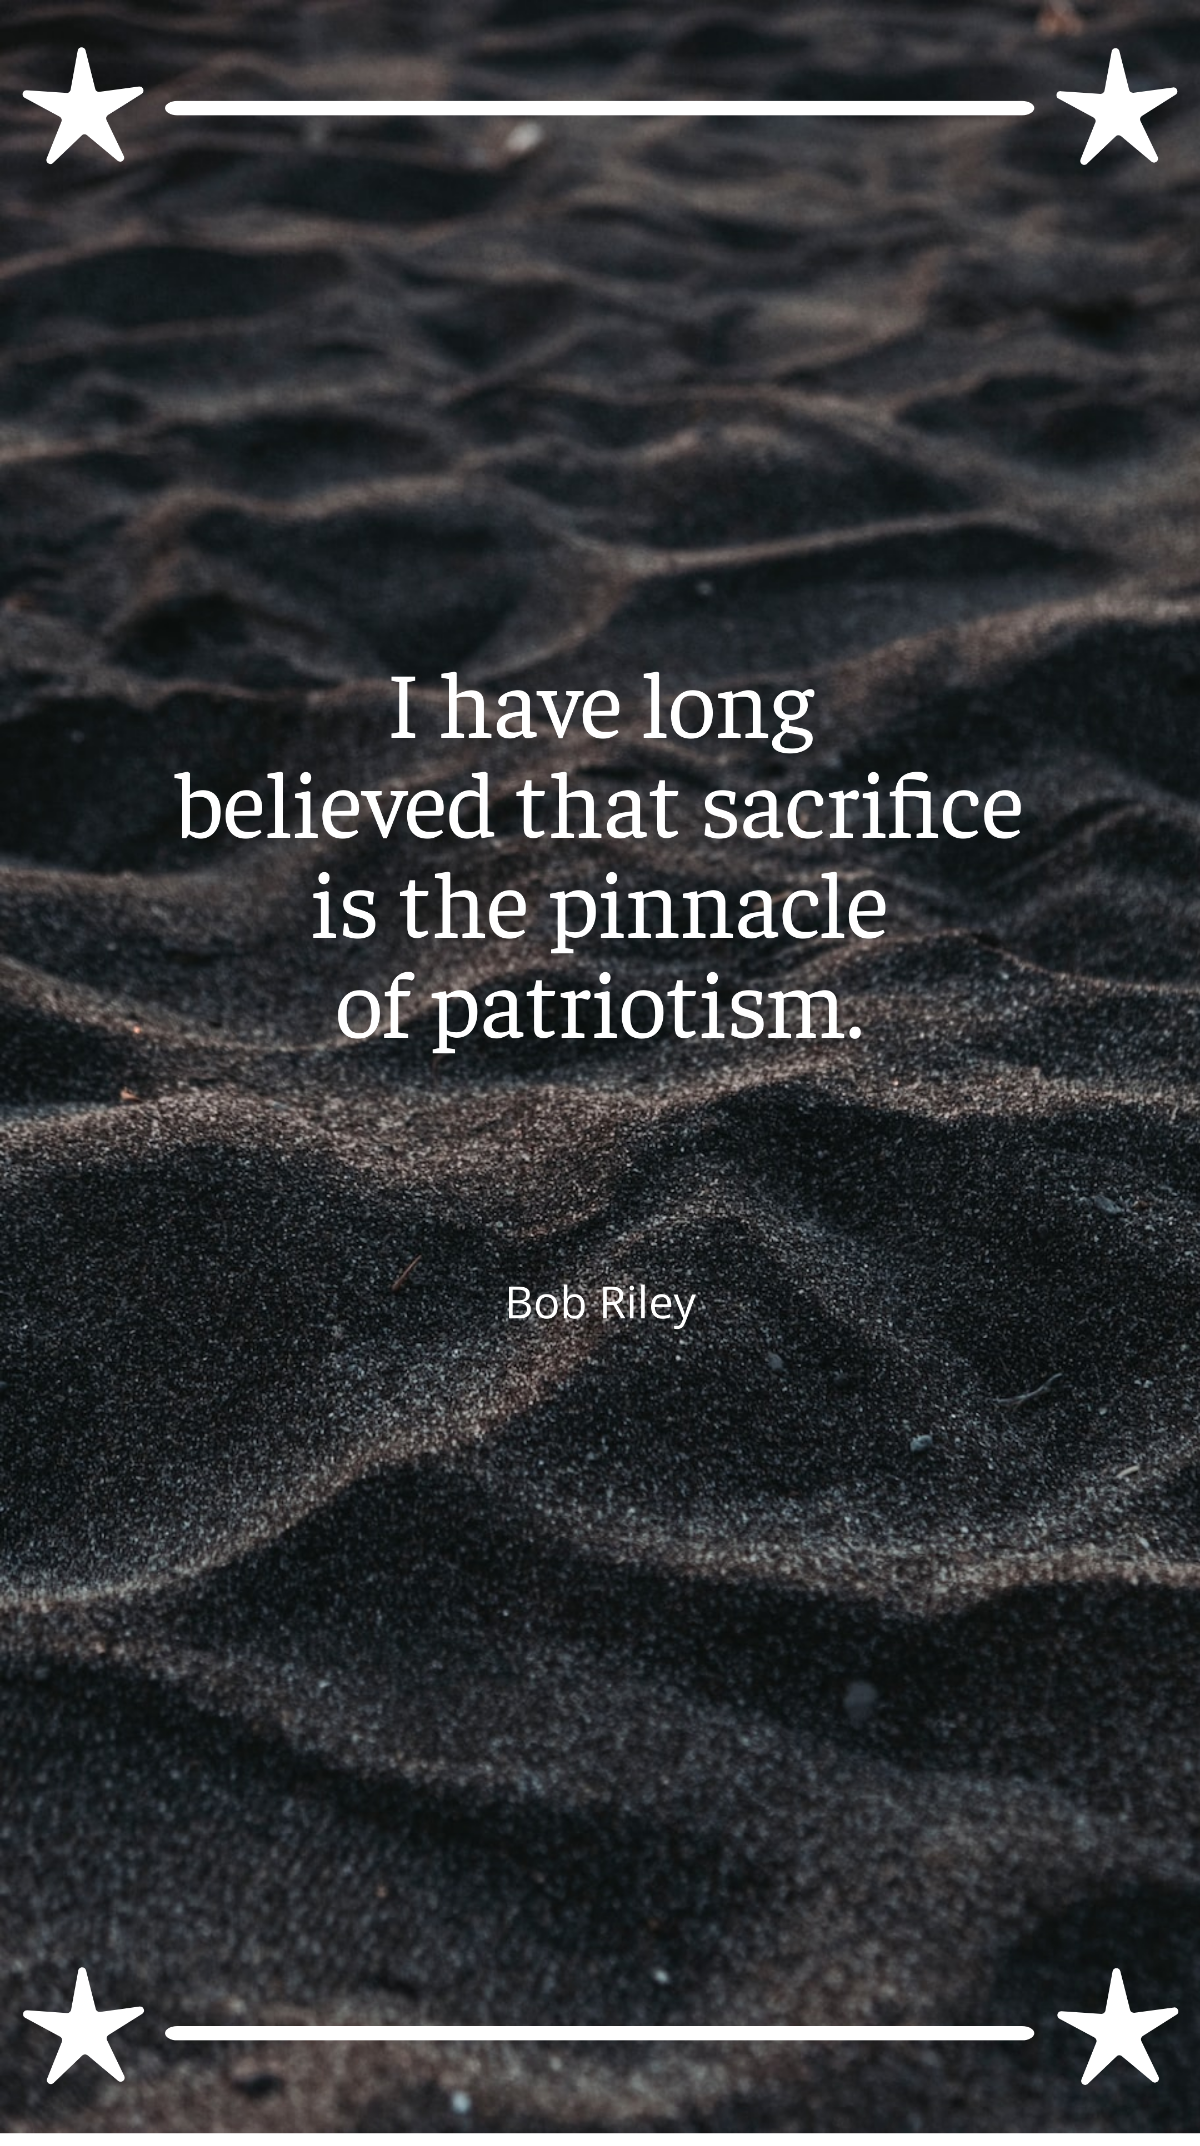 Bob Riley - "I have long believed that sacrifice is the pinnacle of patriotism.”